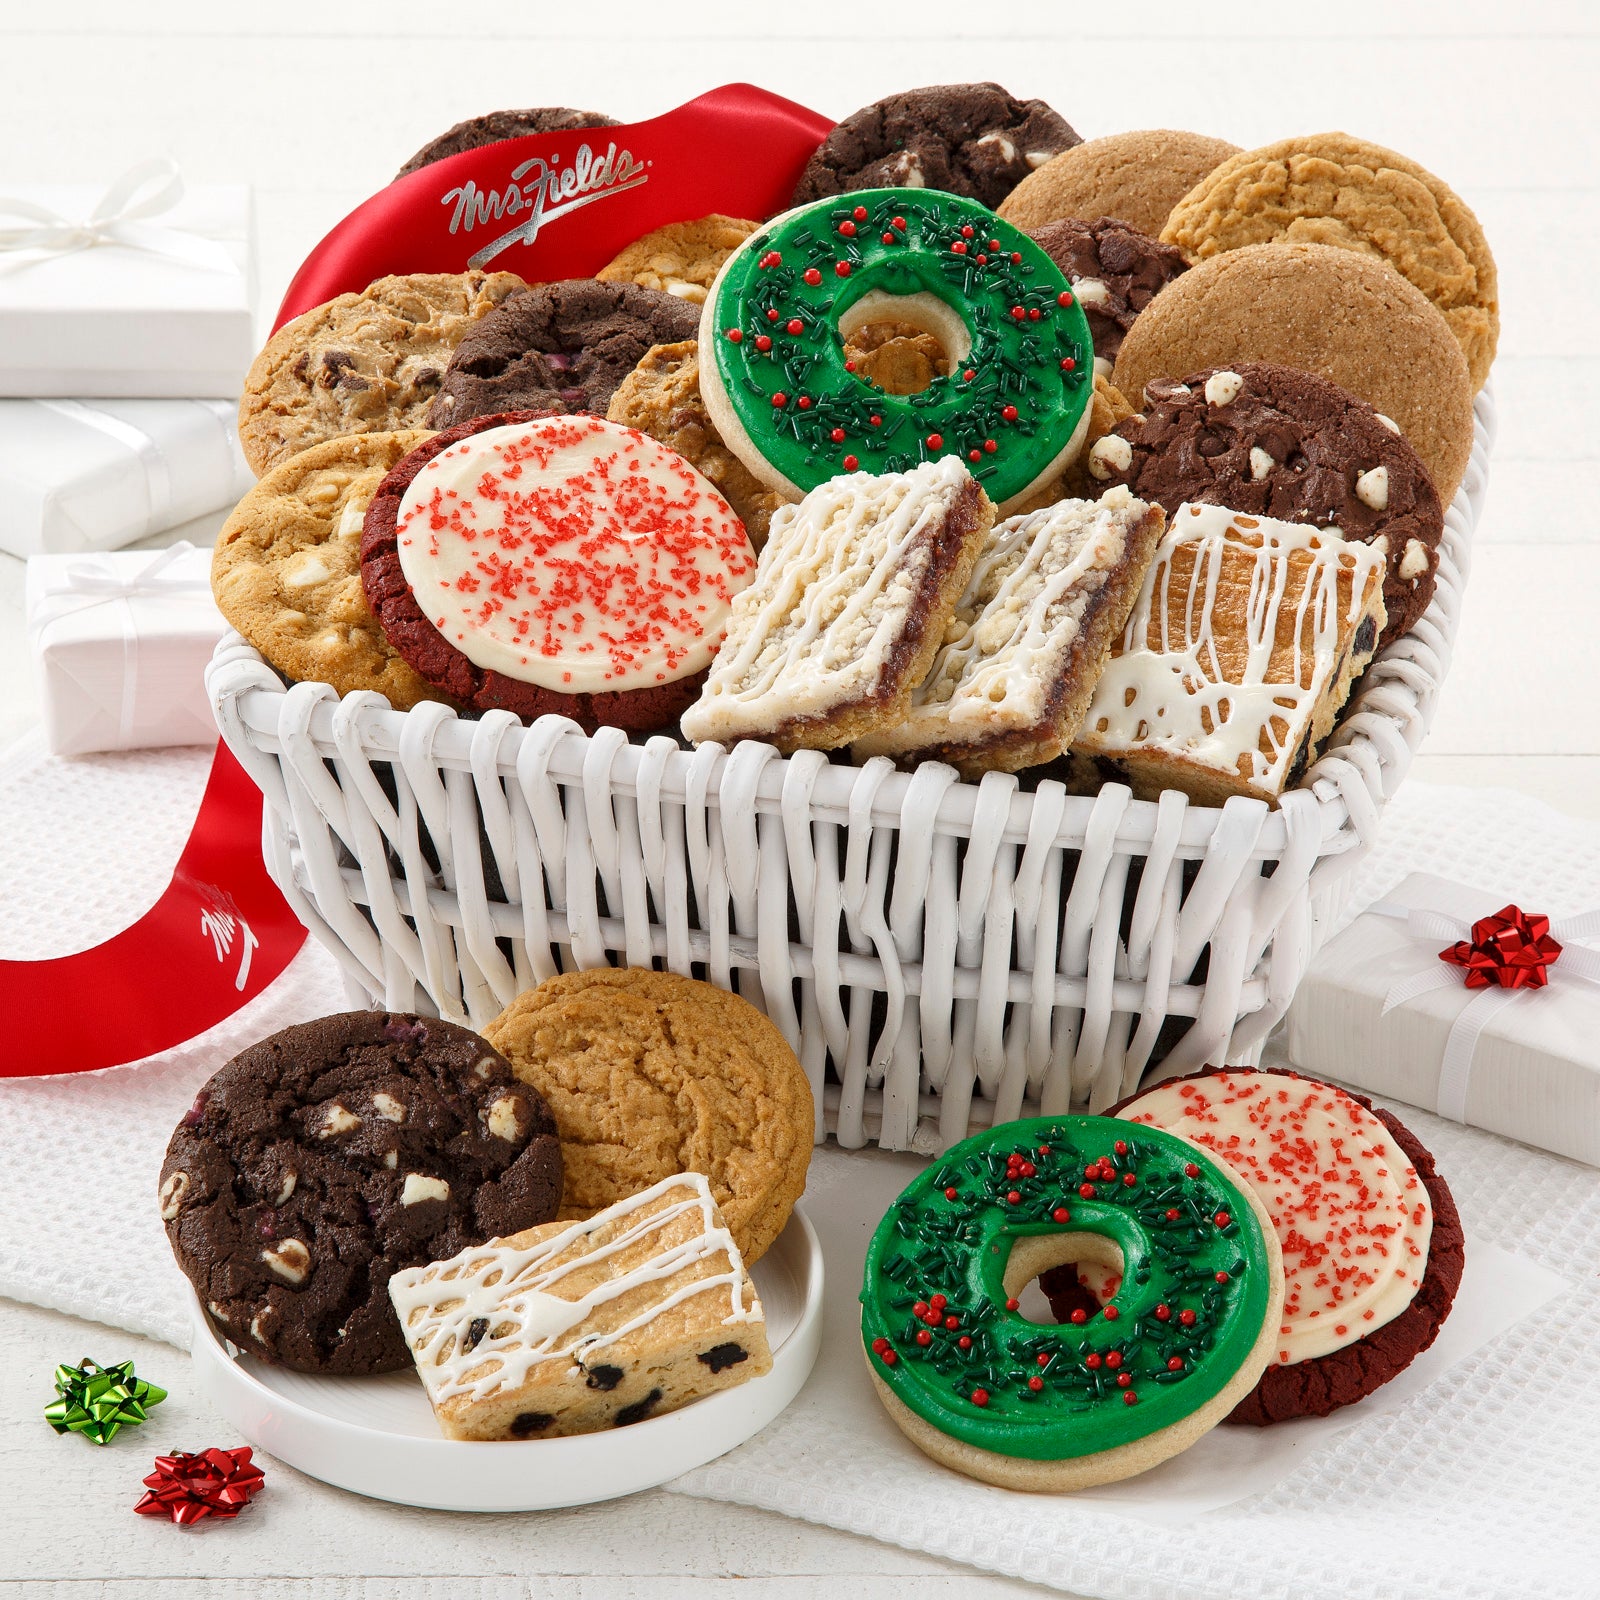 A white basket filled with an assortment of original cookies, four fruit bars, and four frosted cookies. tied with a red Mrs Fields ribbon